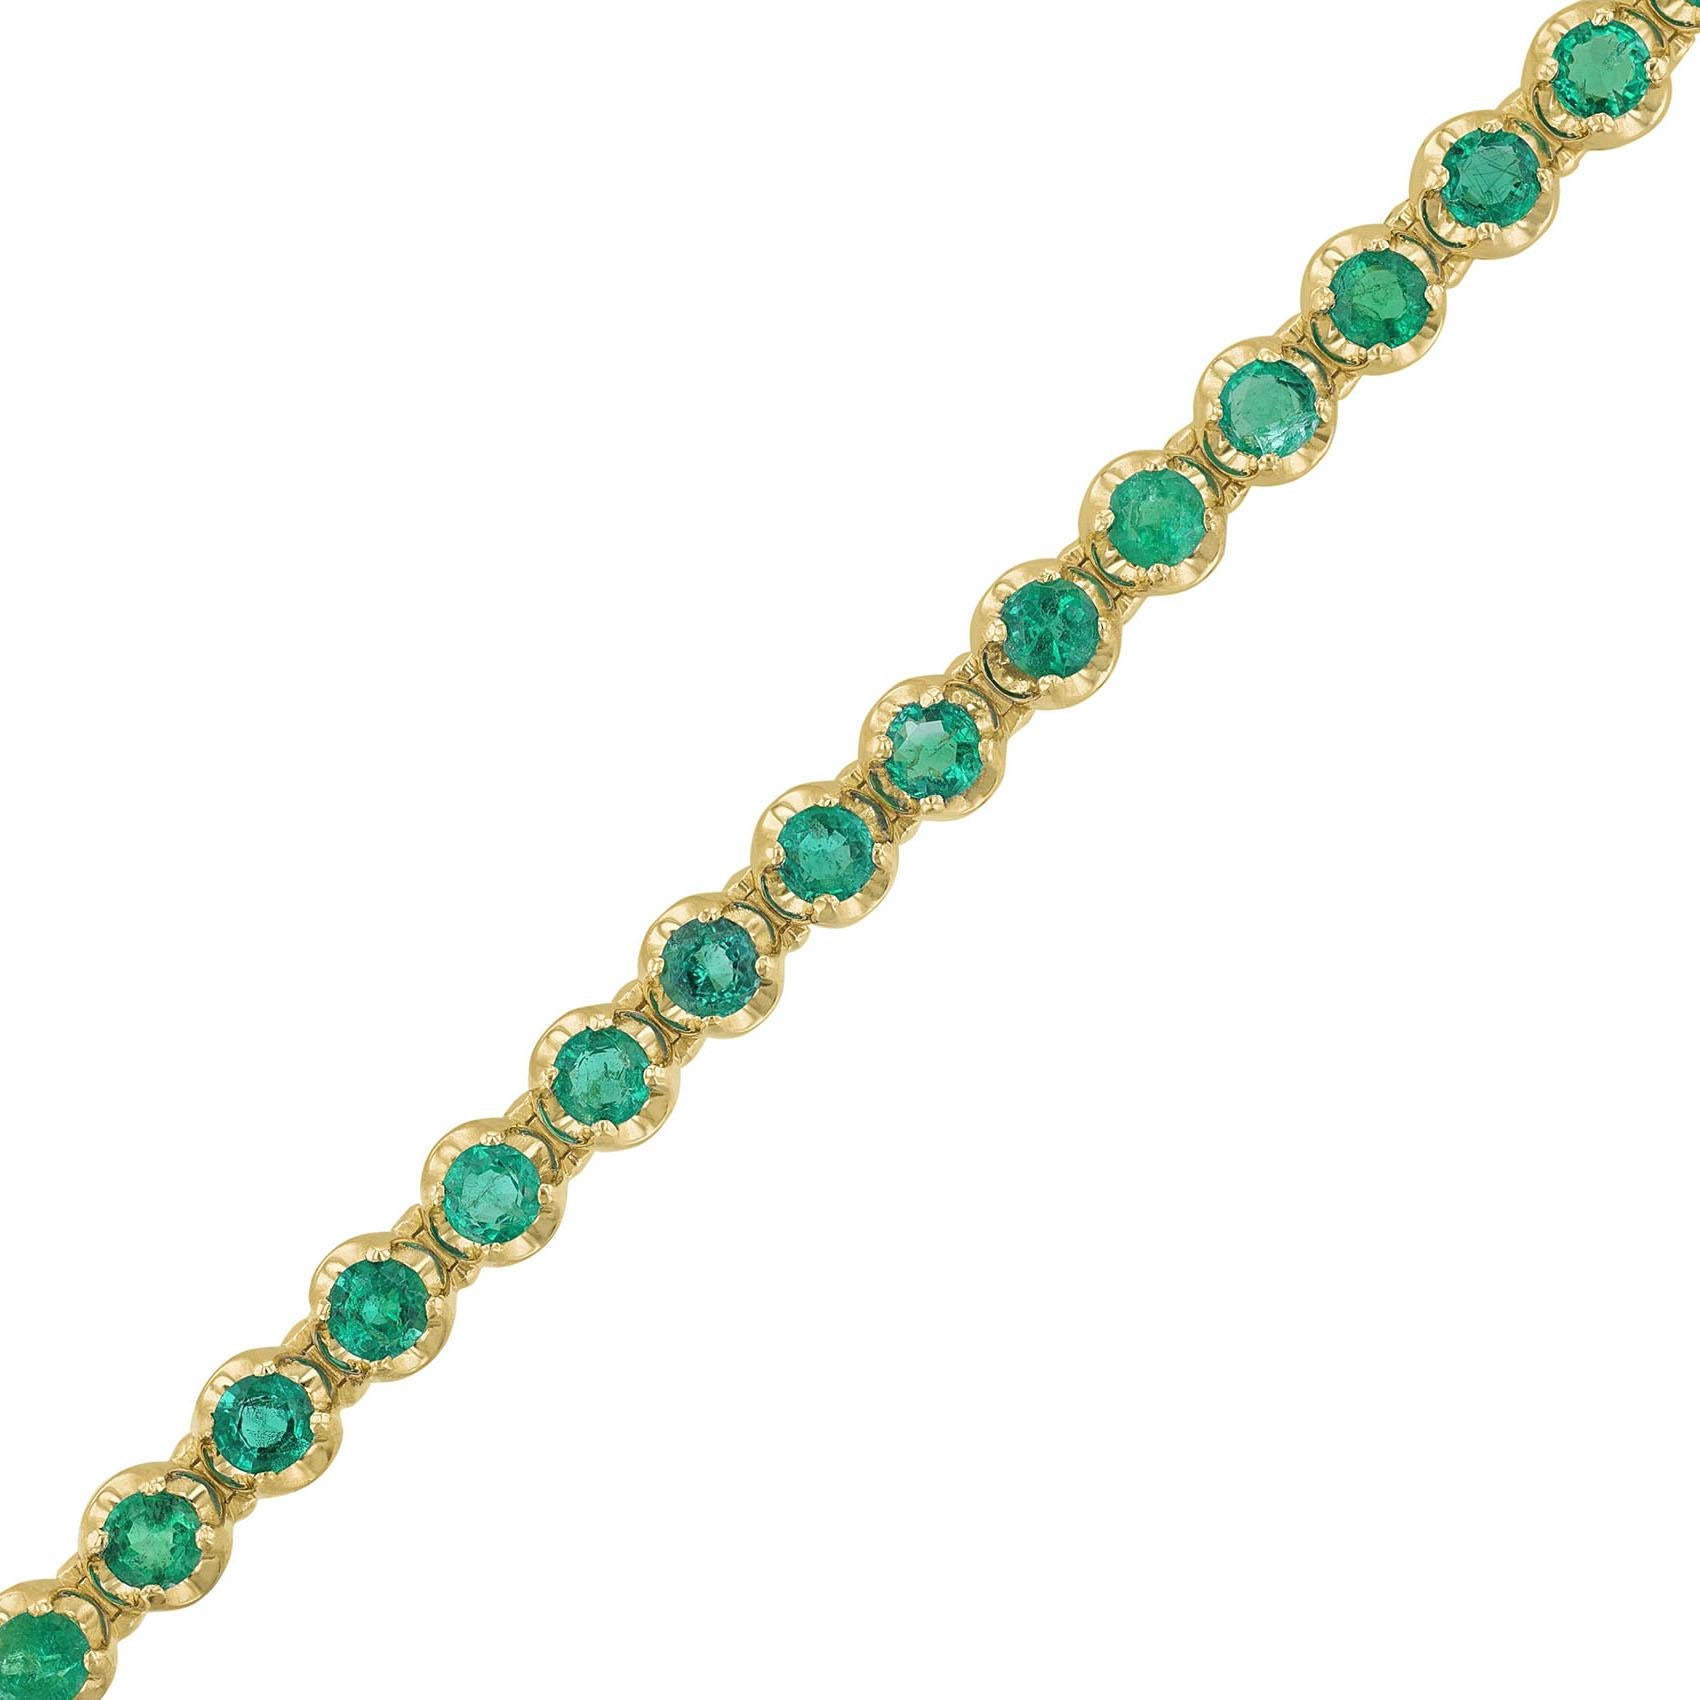 This bracelet is made in 14K yellow gold. It features 35 round cut emeralds weighing 4.18 carats. All stones are prong set. 
